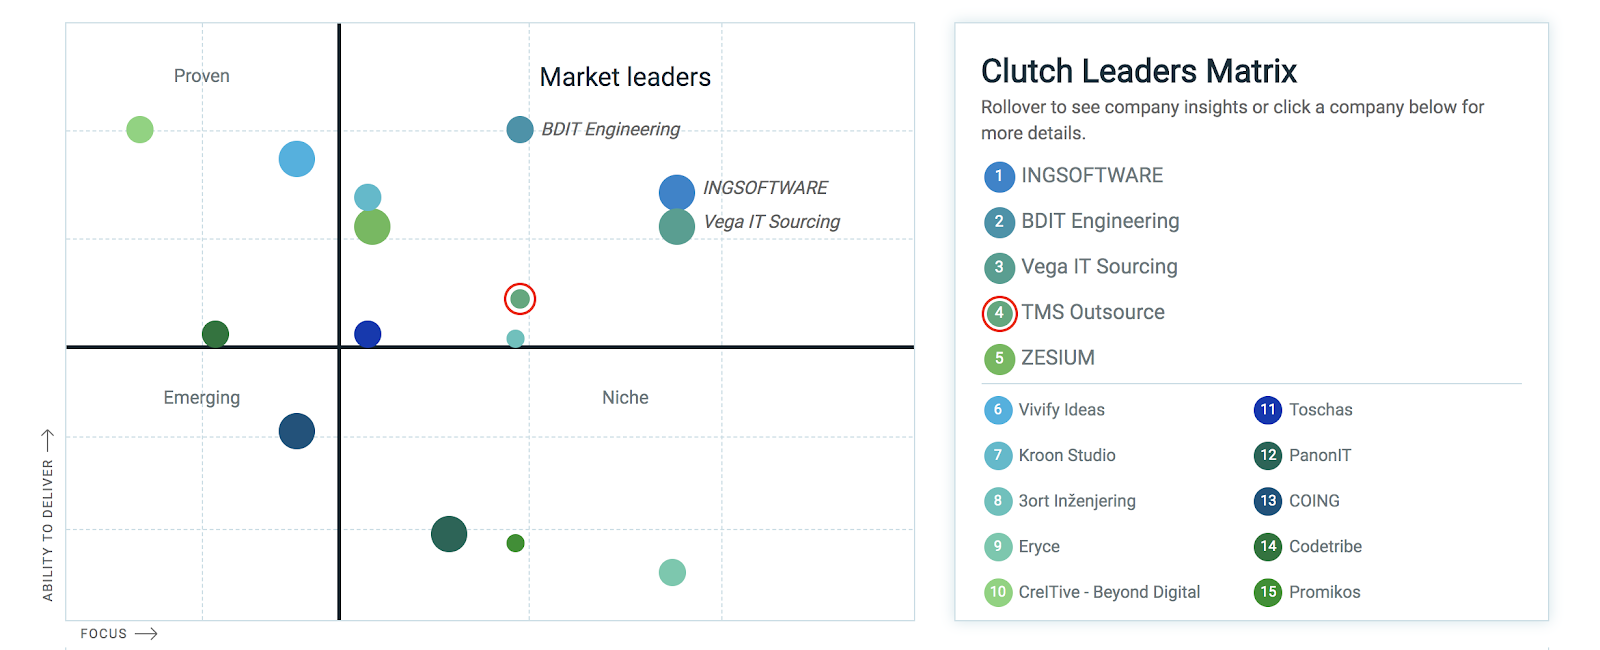 TMS-on-Clutch TMS Outsource Named Top Software Developer by Clutch